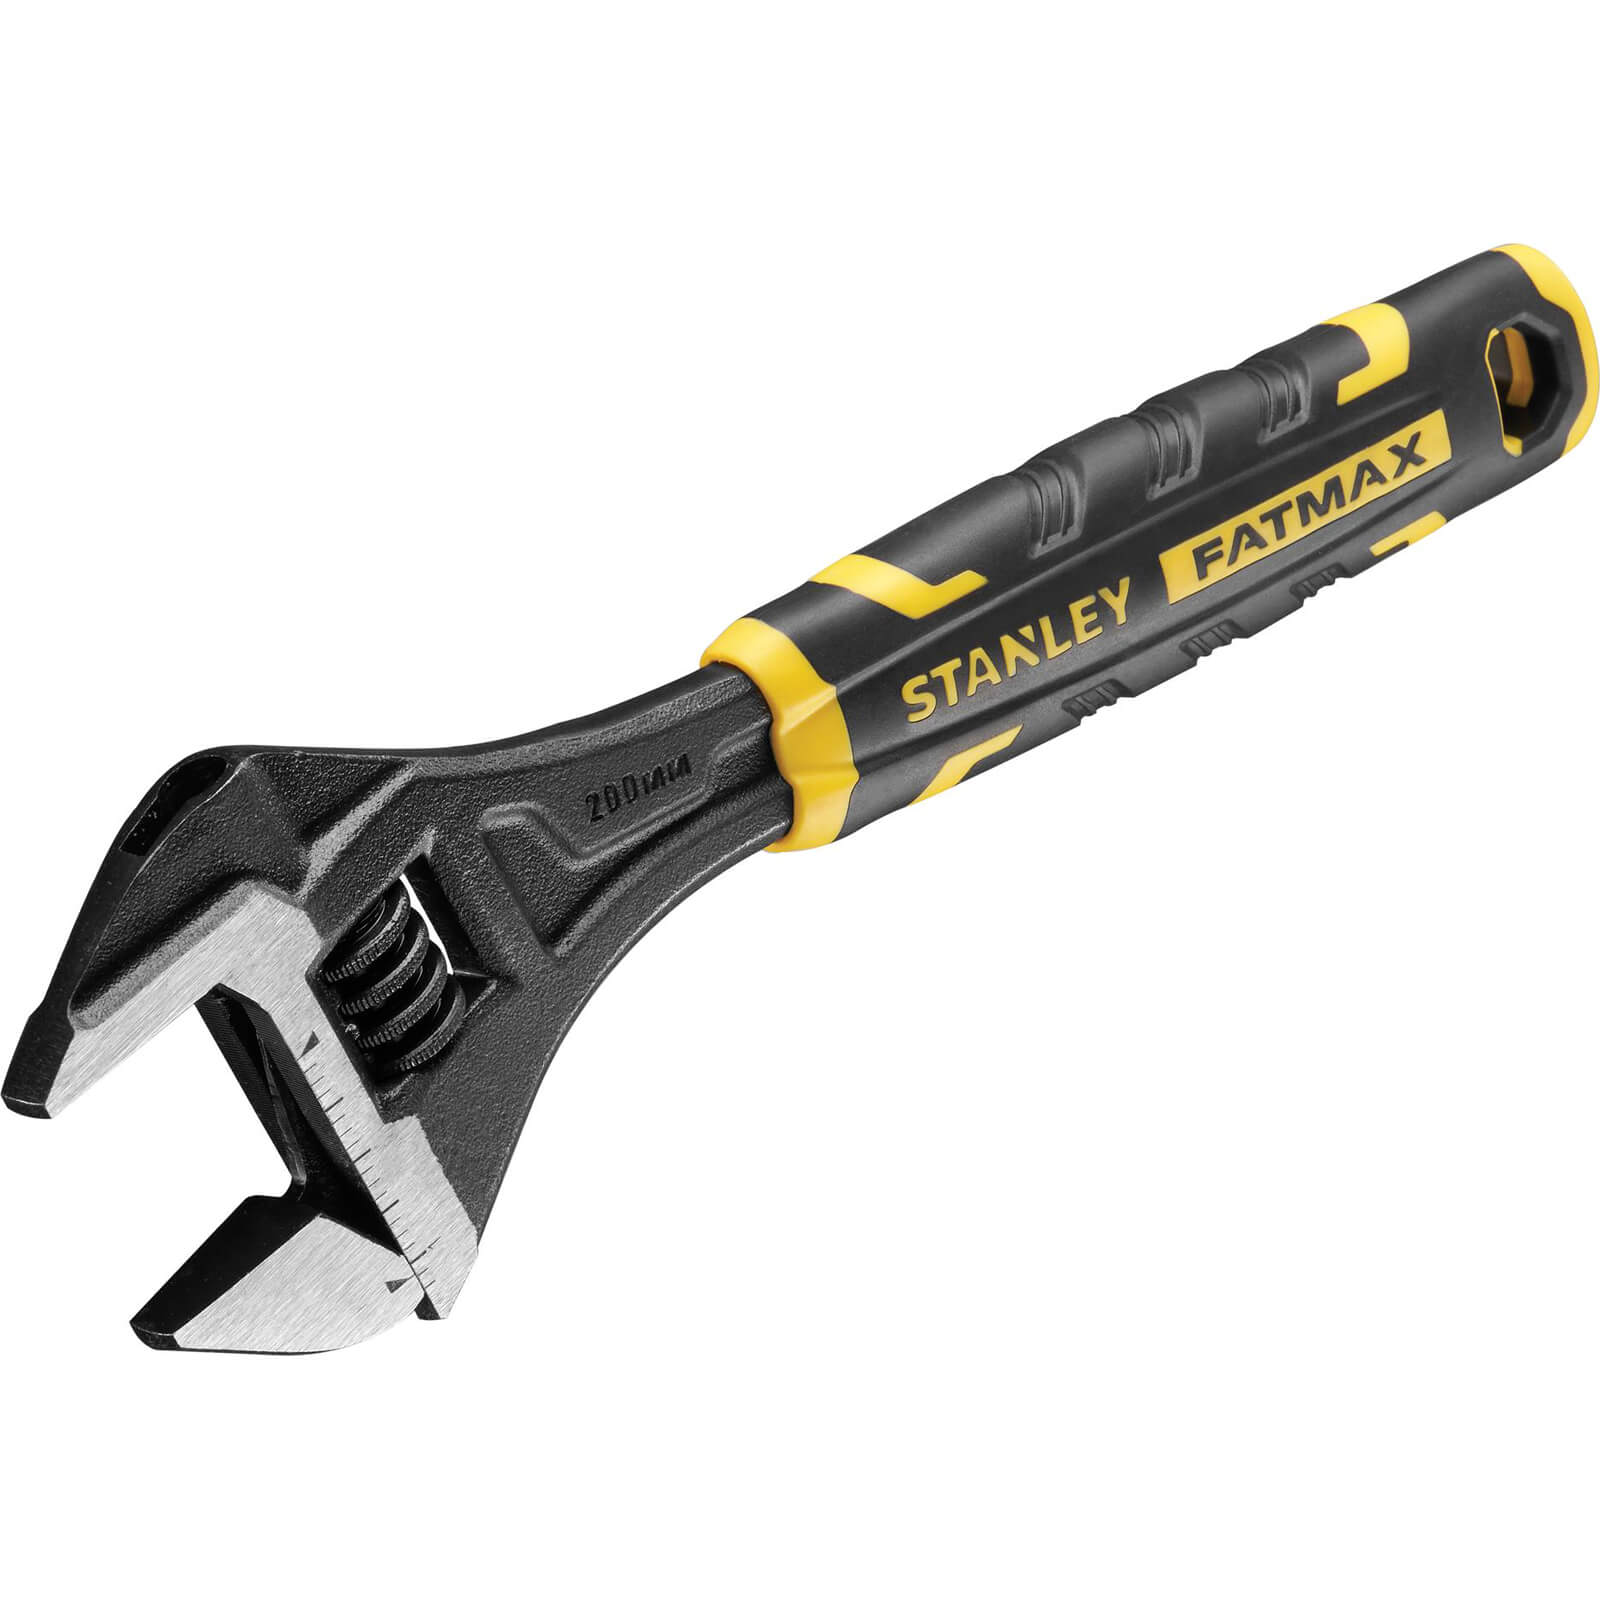 Image of Stanley Tools Fatmax Quick Adjustable Wrench 200mm